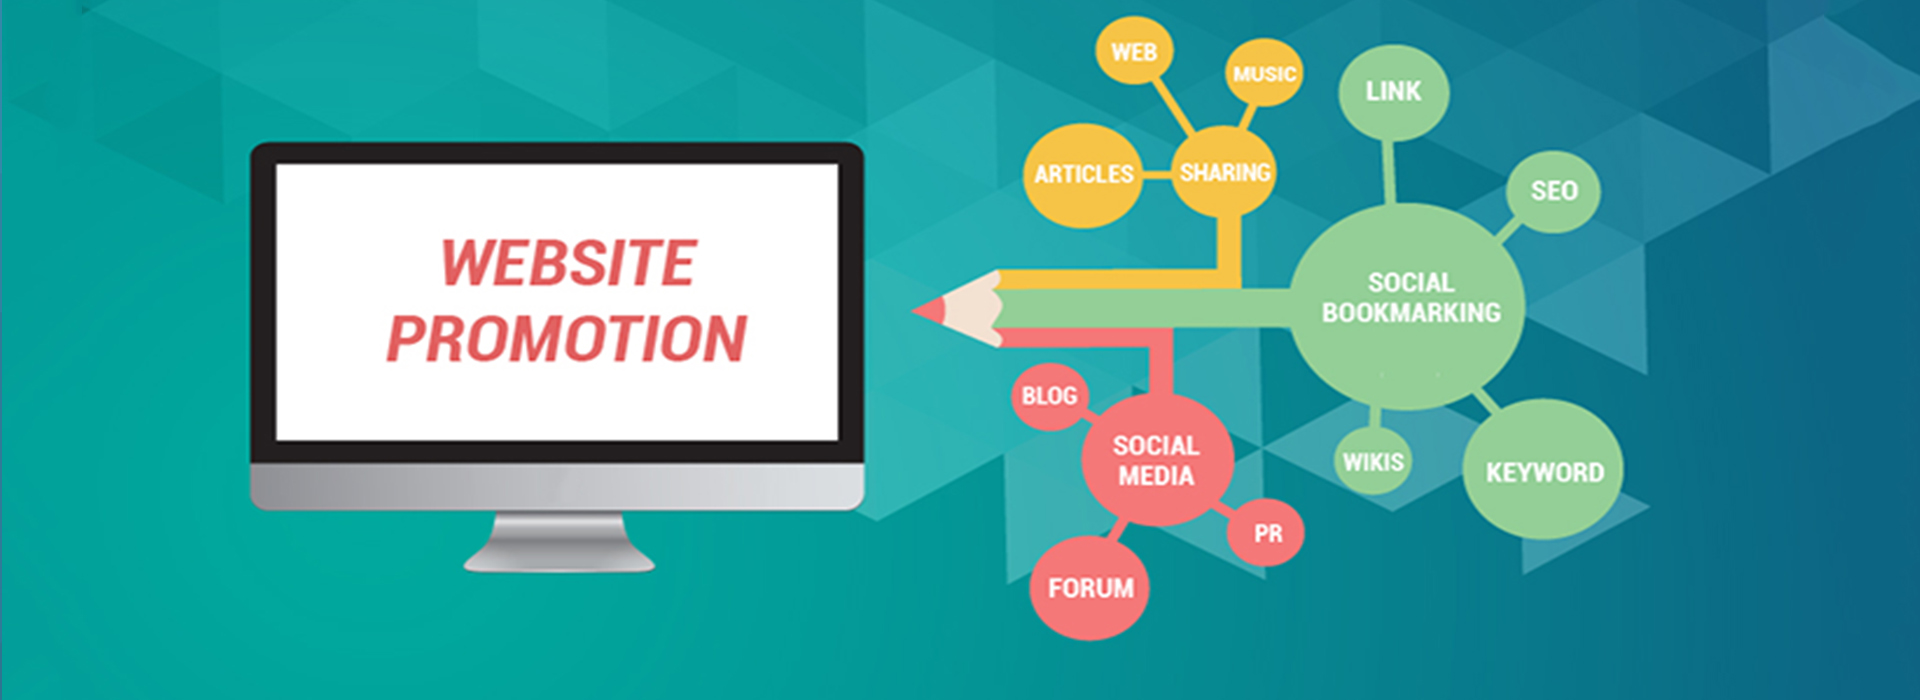 Why Website Promotion is Important?